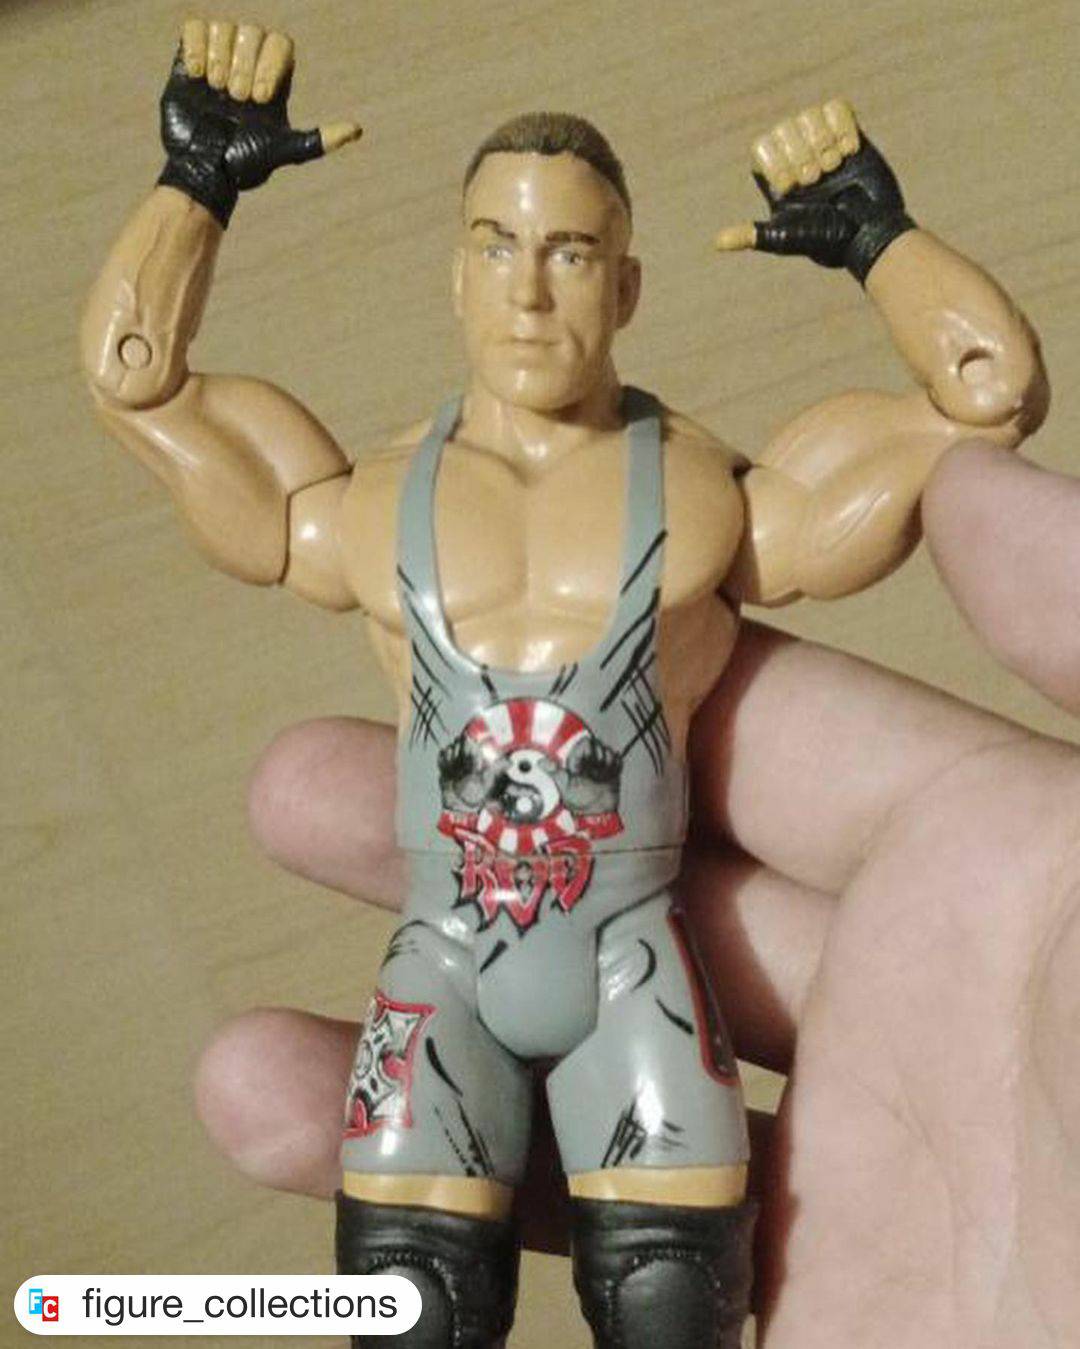 The Major Wrestling Figure Podcast on X: Check out this